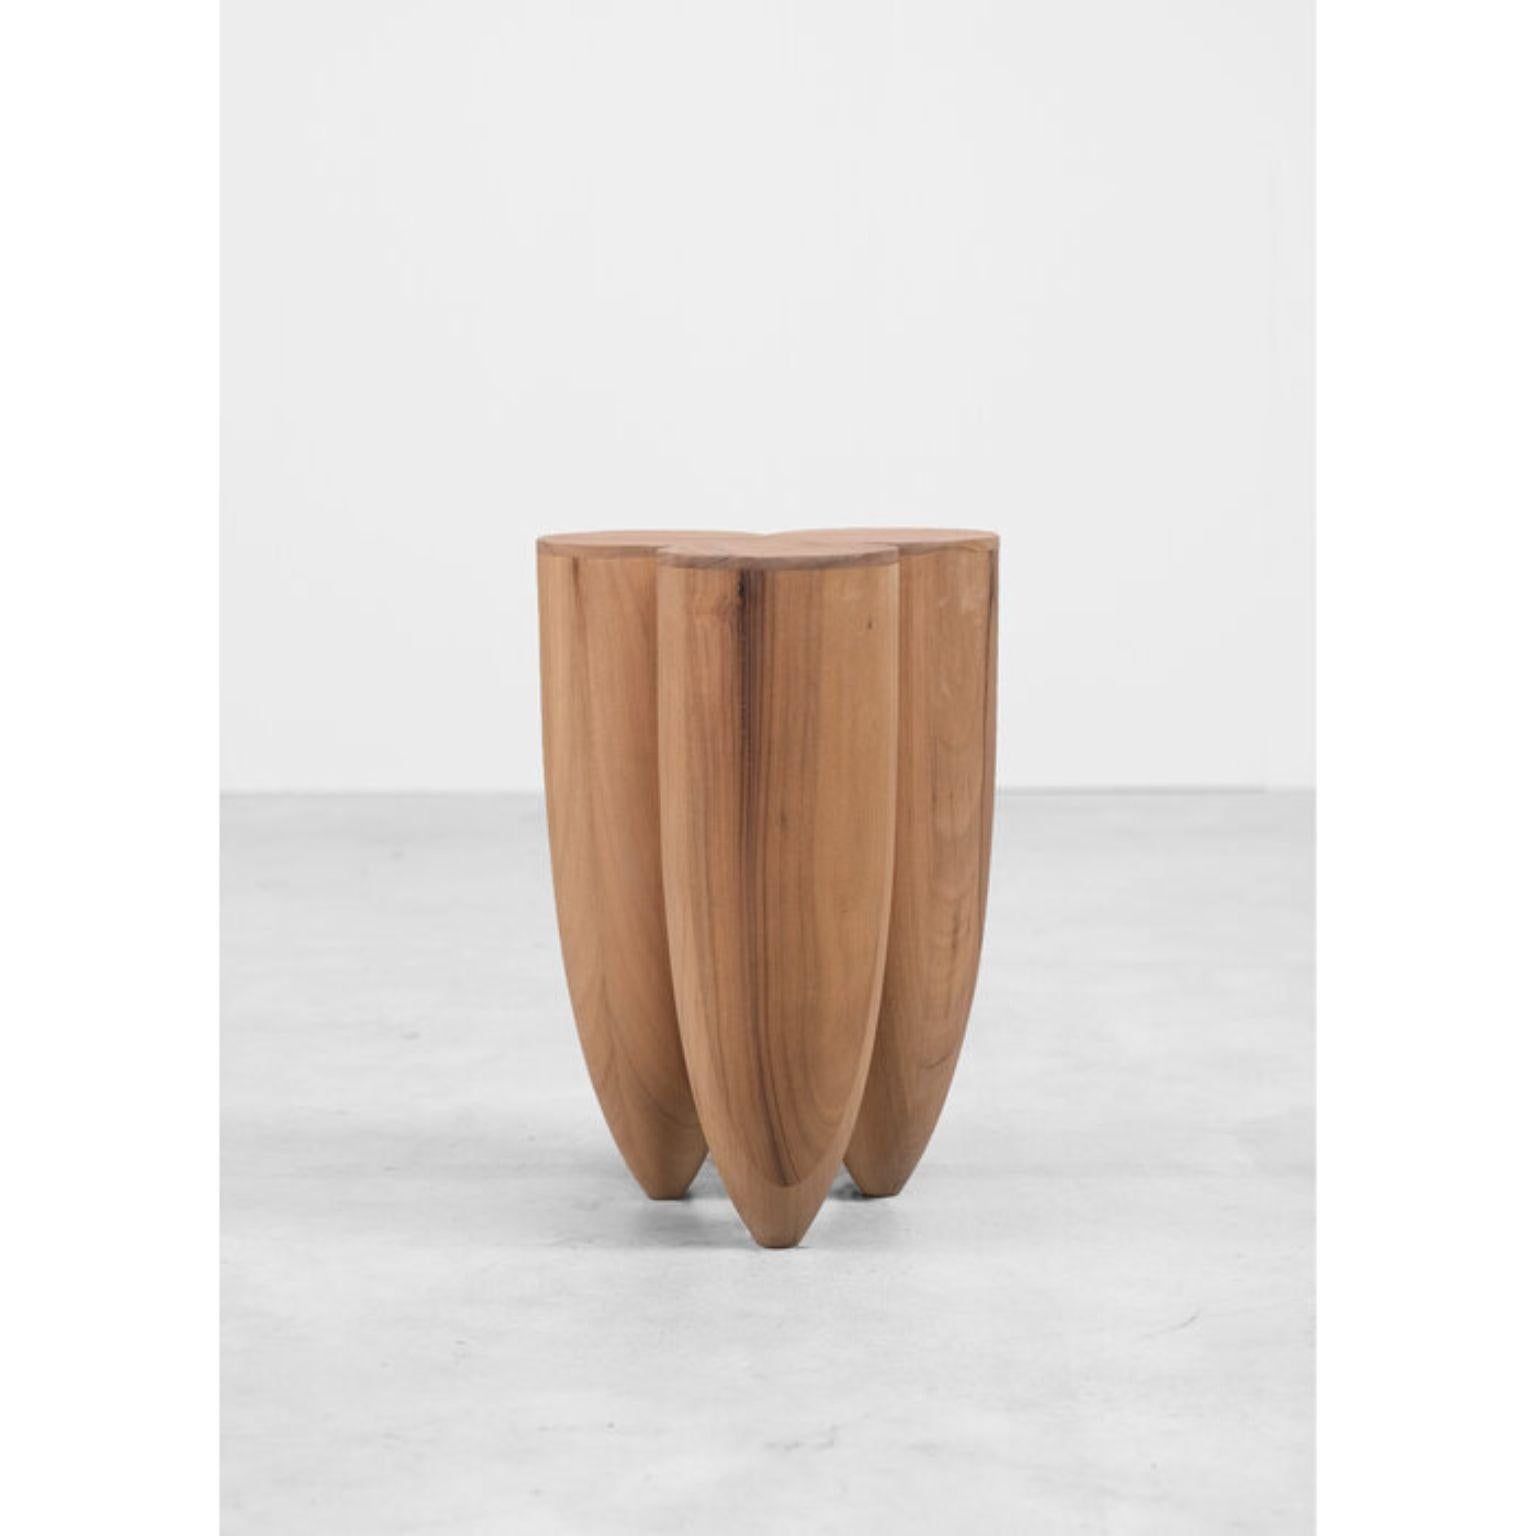 Senufo stool natural by Arno Declercq
Dimensions: W 30 x D 30 x H 50 cm 
Materials: African walnut

Arno Declercq
Belgian designer and art dealer who makes bespoke objects with passion for design, atmosphere, history and craft. Arno grew up in